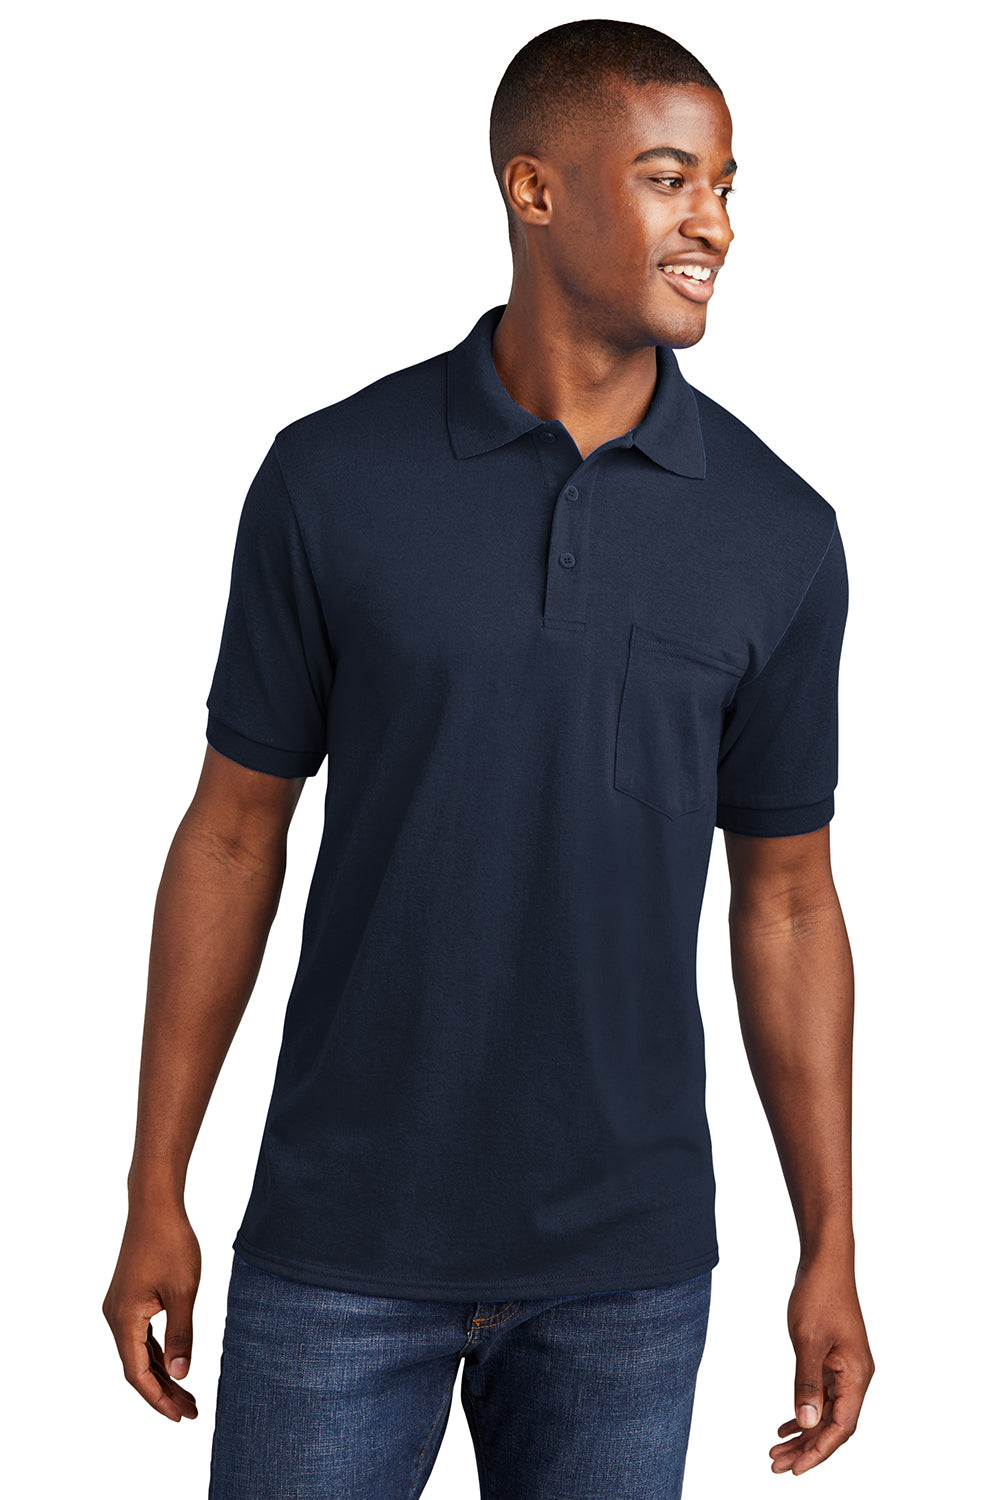 Port & Company KP55P Mens Core Stain Resistant Short Sleeve Polo Shirt w/ Pocket Navy Blue Front